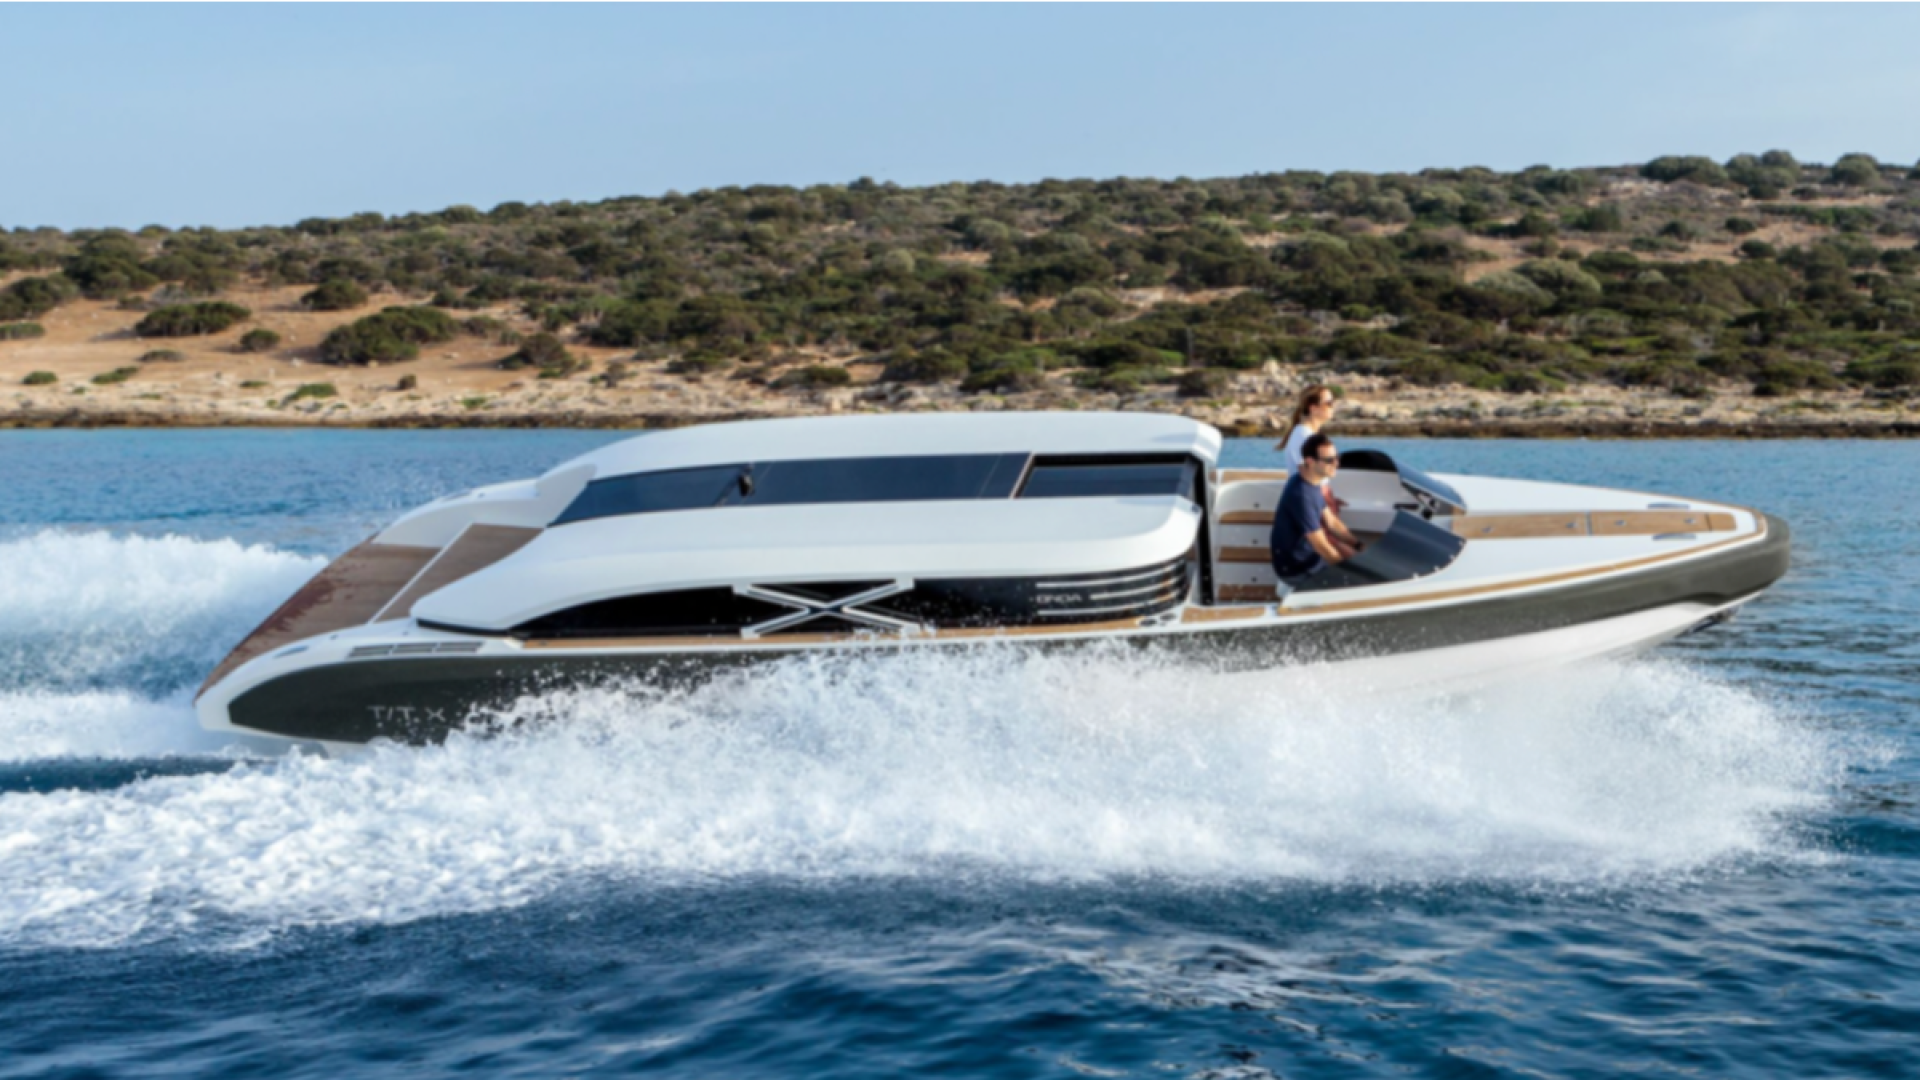 Tender per lo yacht Project X